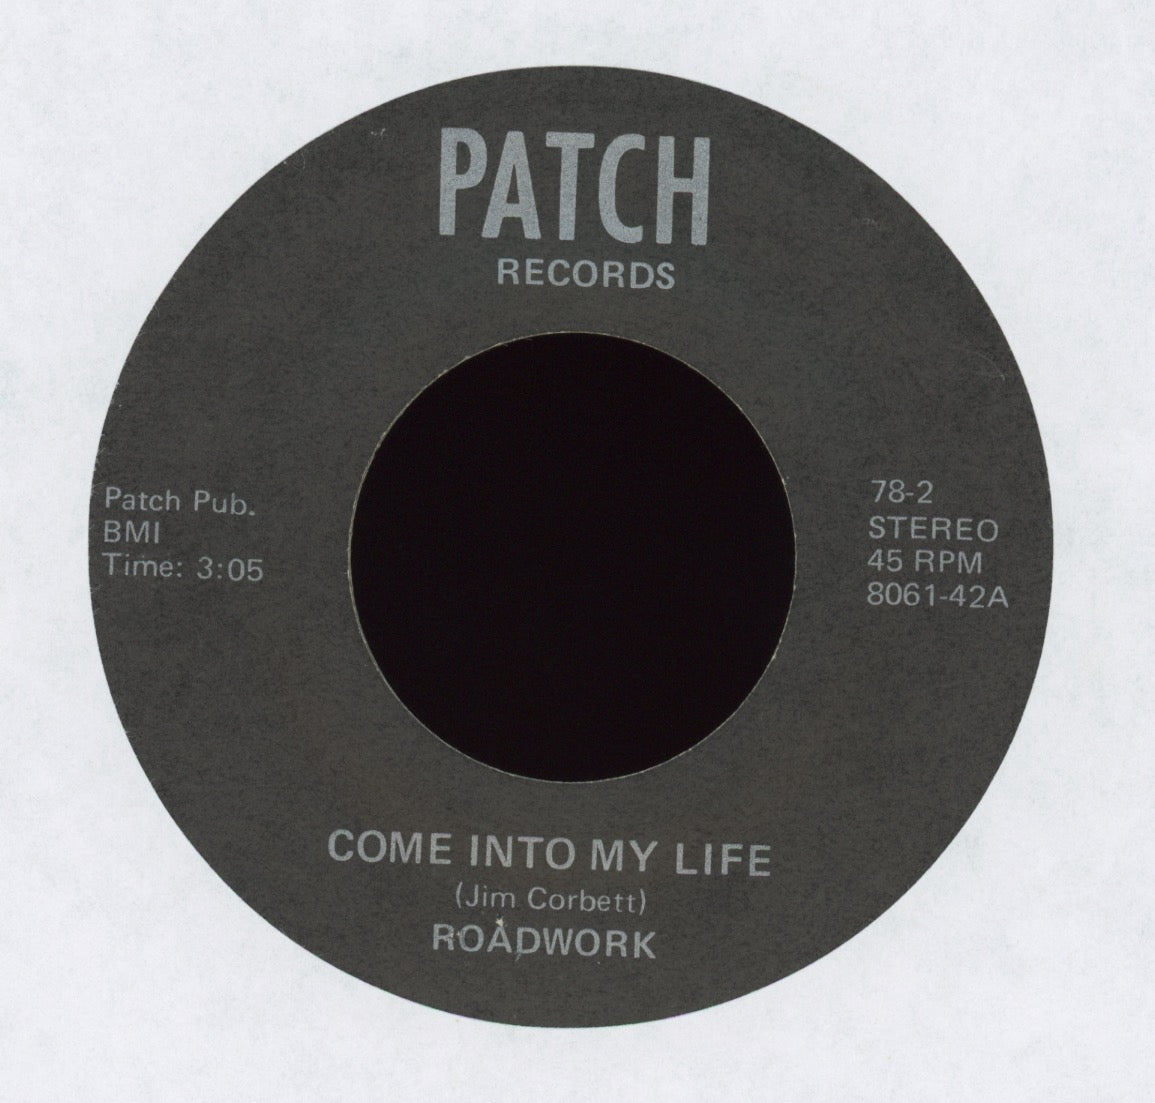 Roadwork - Come Into My Life on Patch